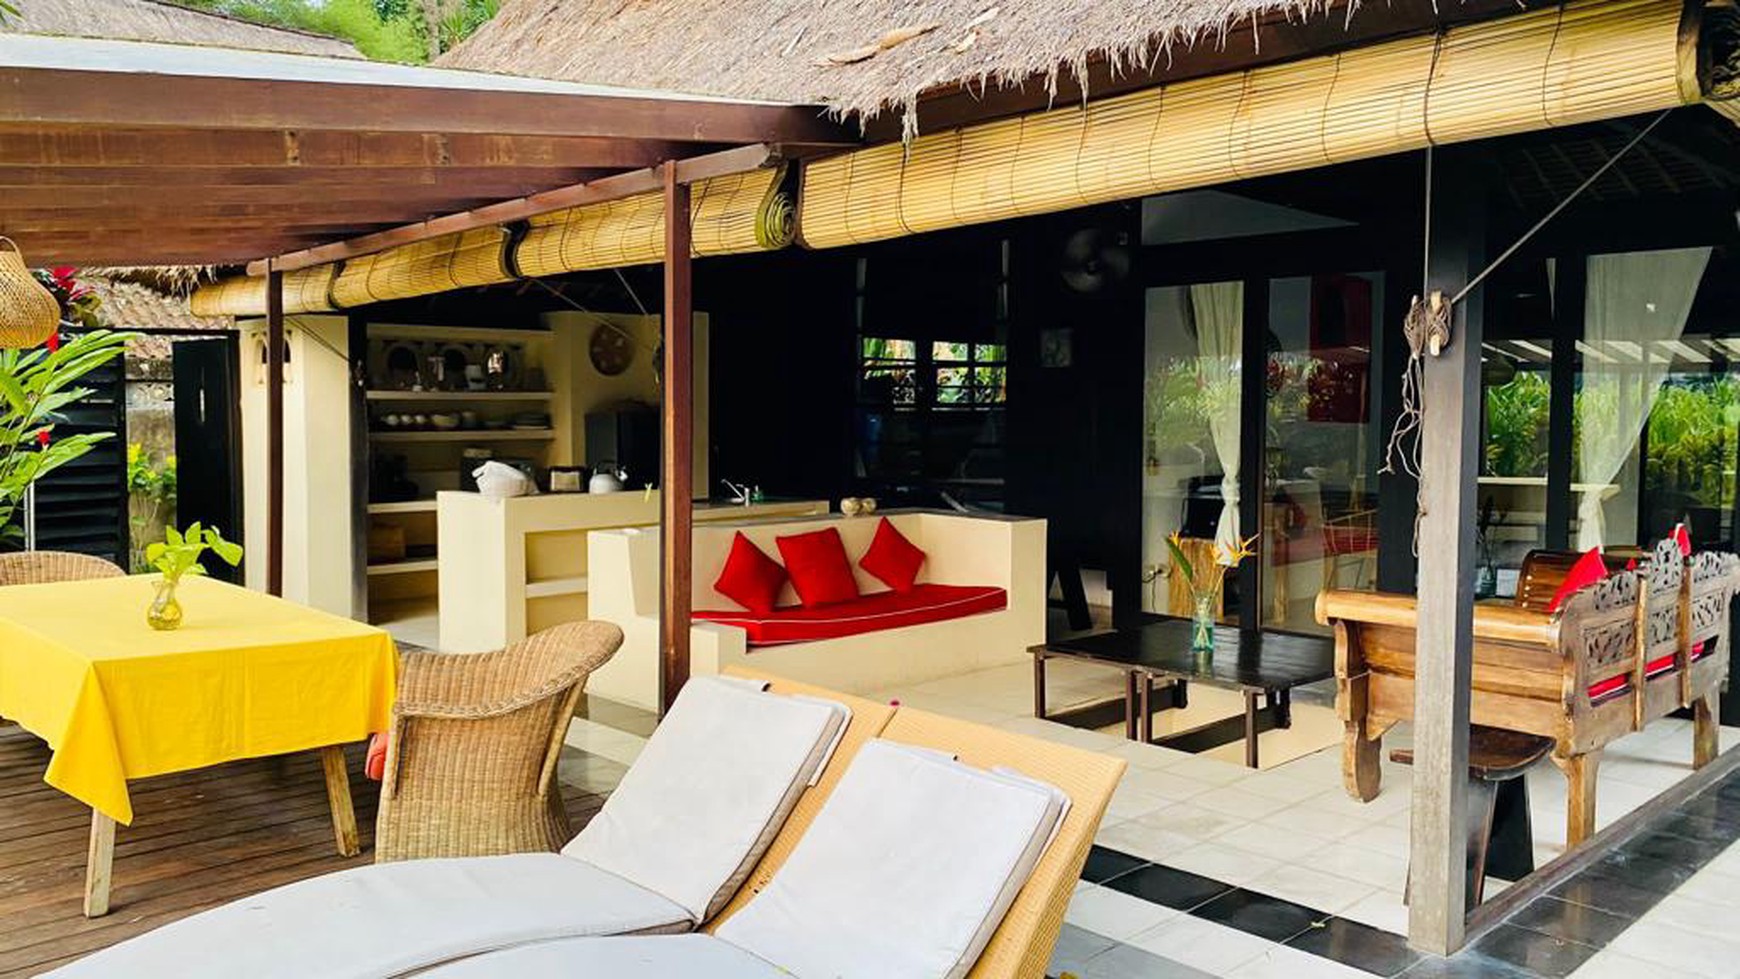 Beautiful 3 Bedroom Leasehold Villa For Sale 10 Minutes From Ubud Center